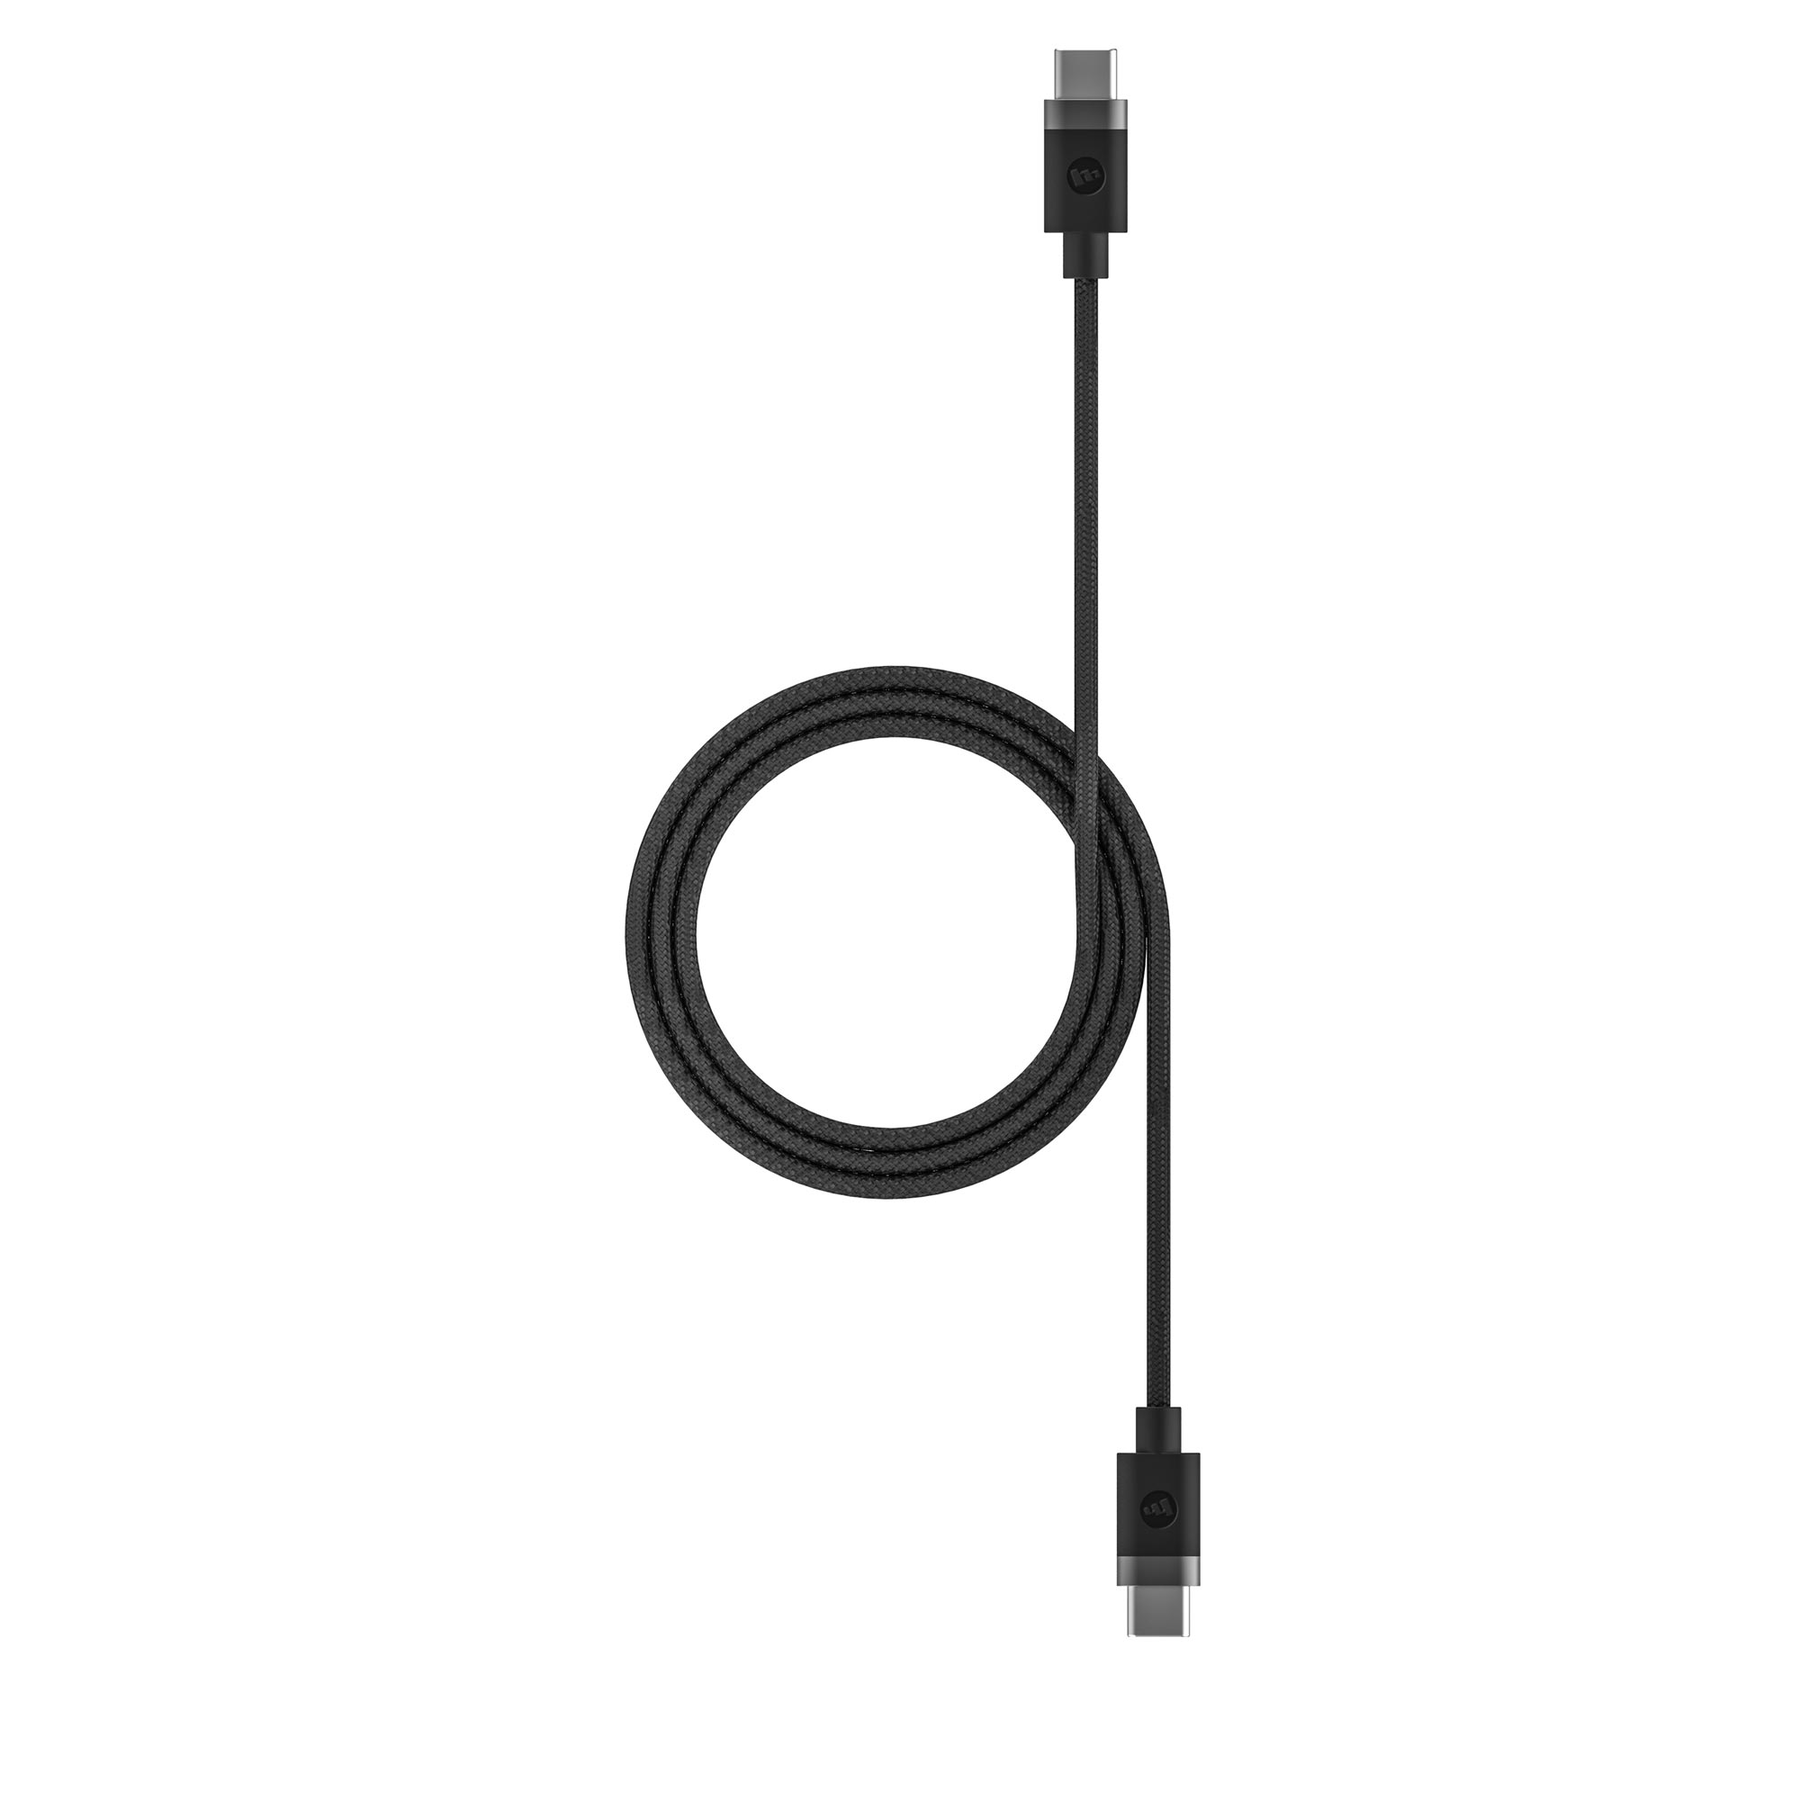 Mophie USB-C to USB-C(3.1) High Speed Charging Cable -1.5M